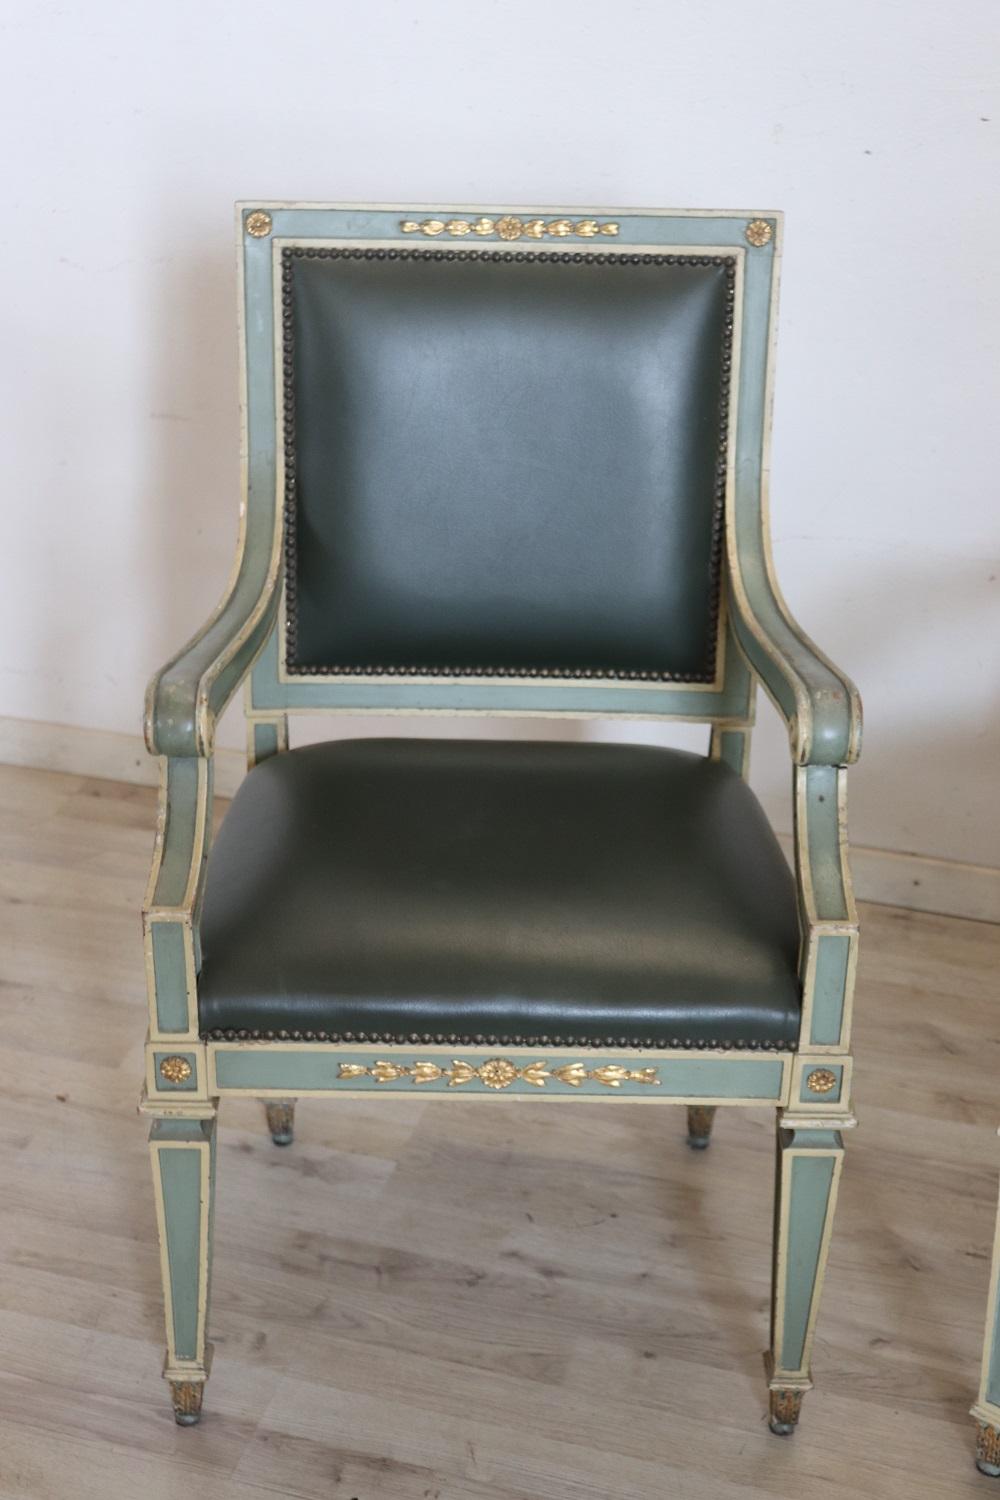 Lovely Italian antique armchairs, set of 2, 1930s. These armchairs are Louis XVI style in lacquered wood with fine gilt decorations. Upholstered in green imitation leather. This beautiful armchair has an enveloping shape and a comfortable seat. Used